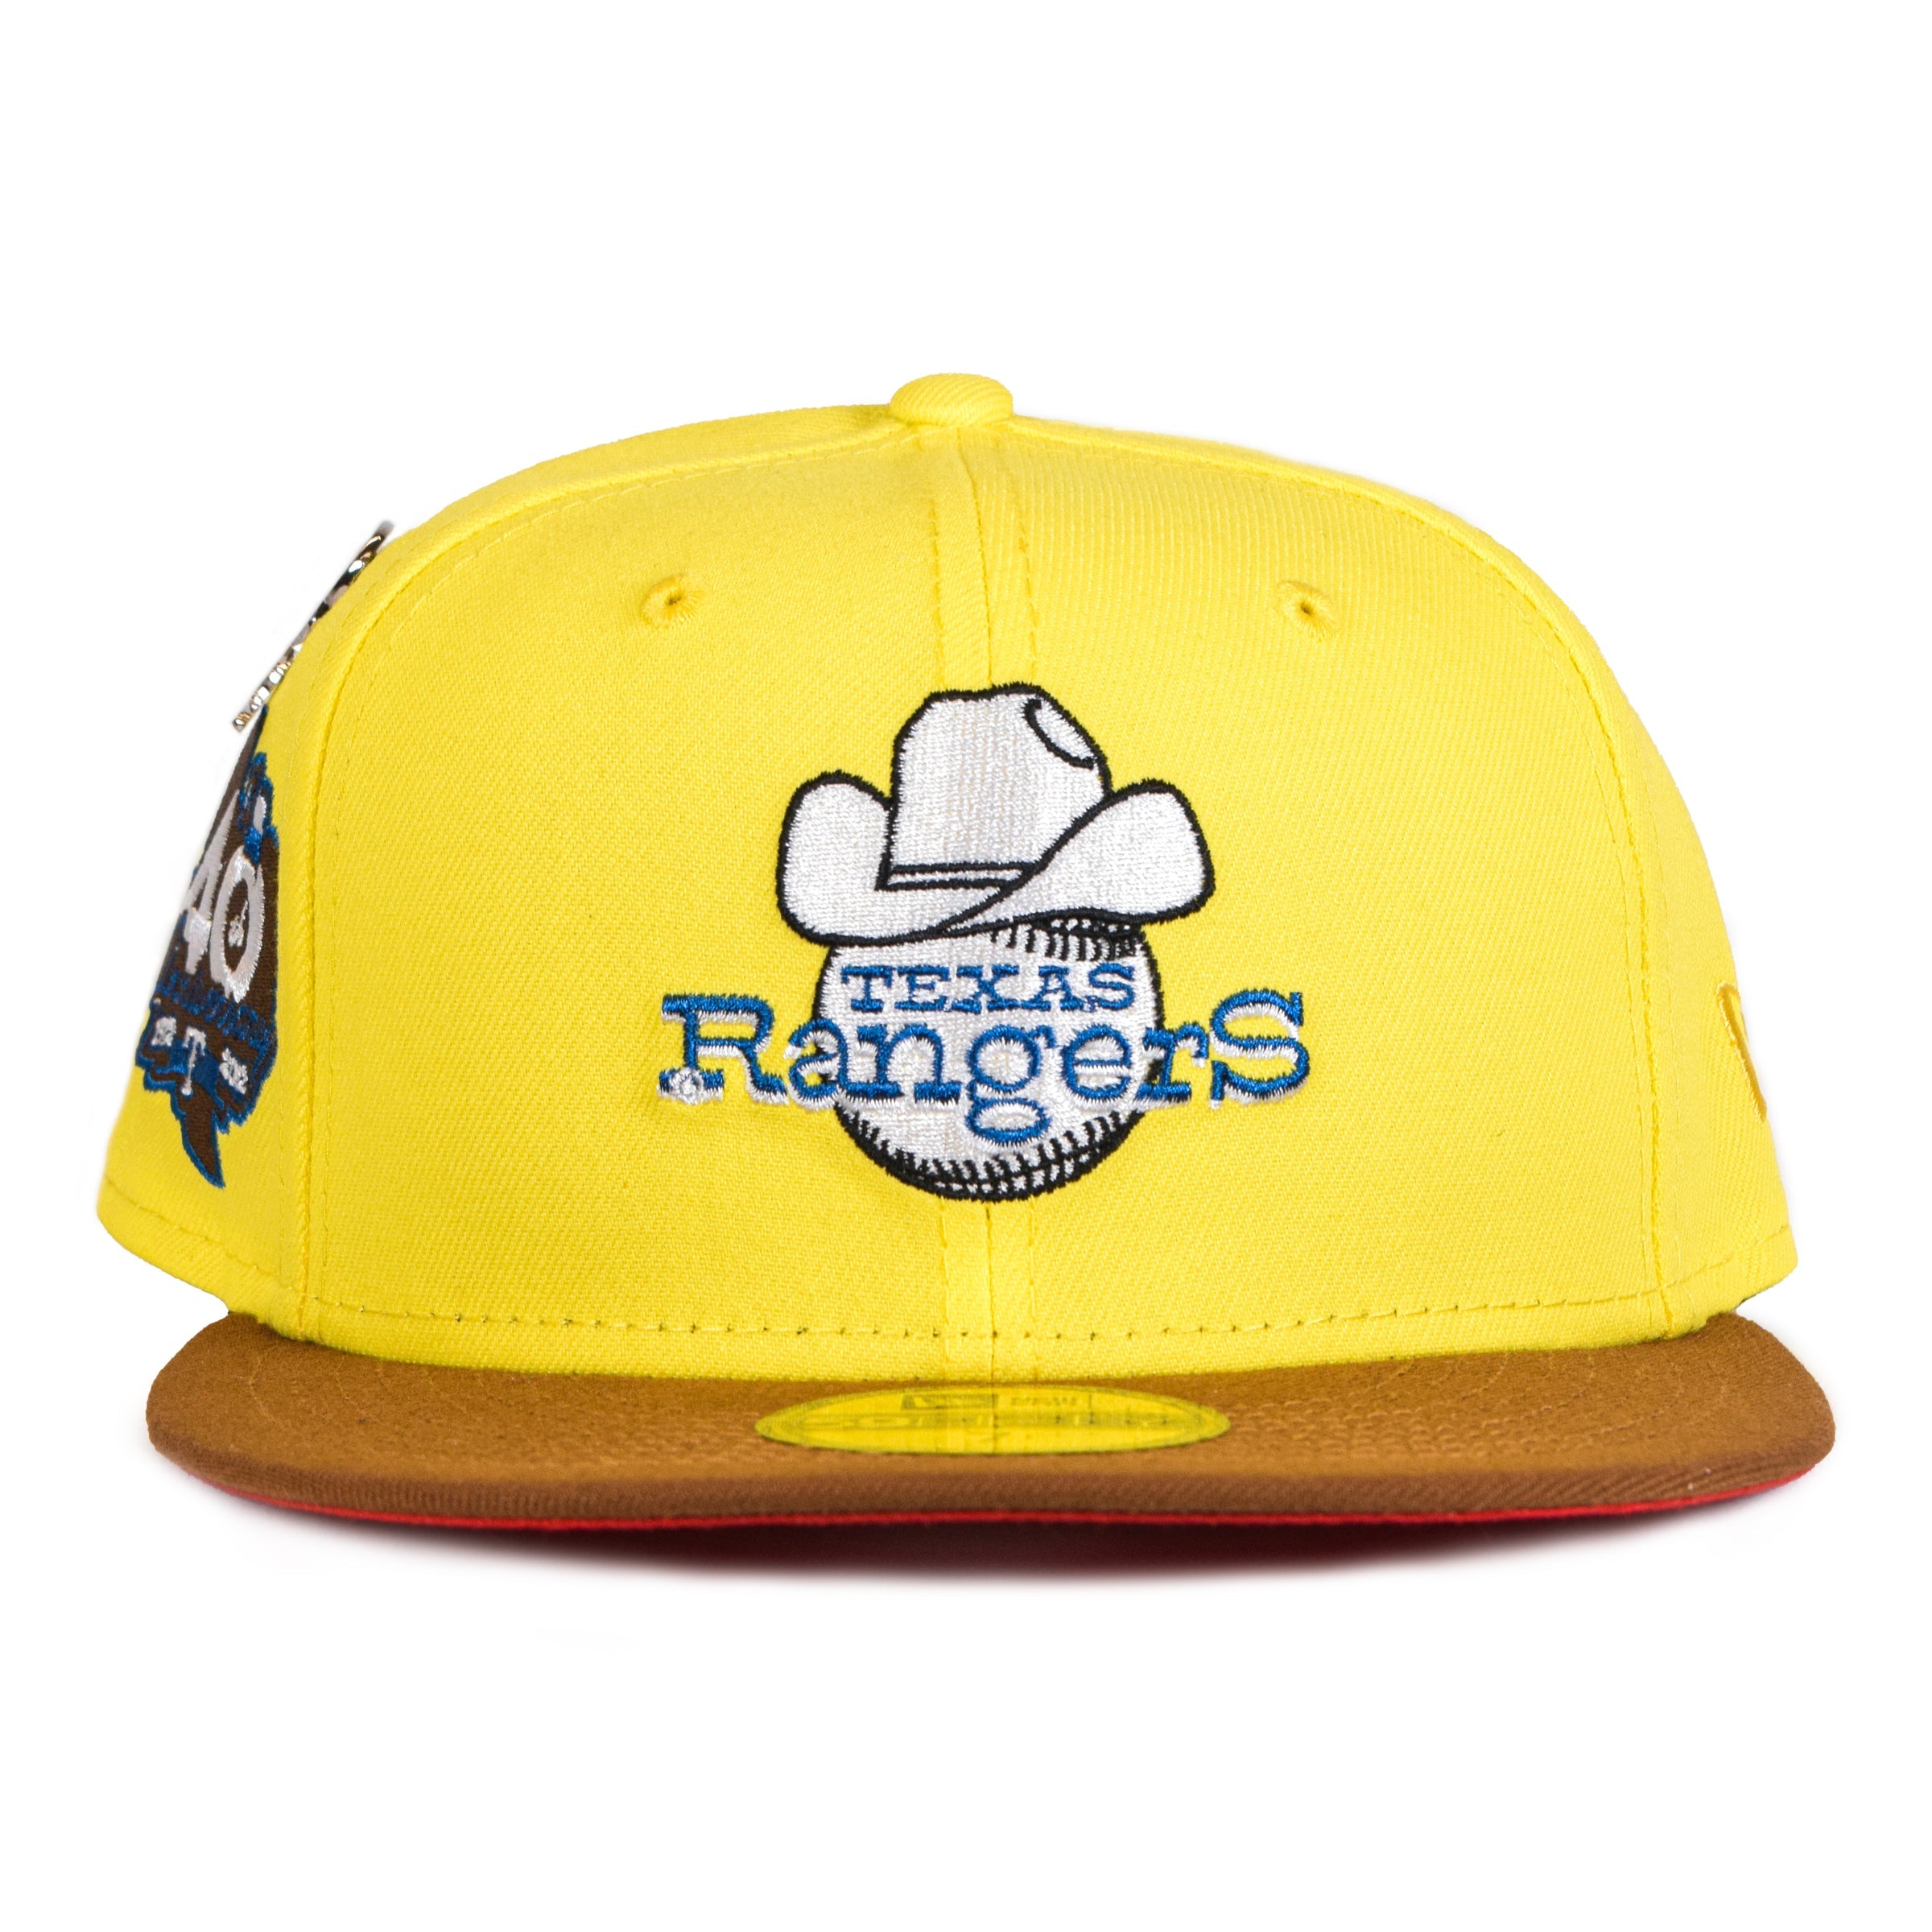 Sheriff Woody Texas Rangers Fitted Hat